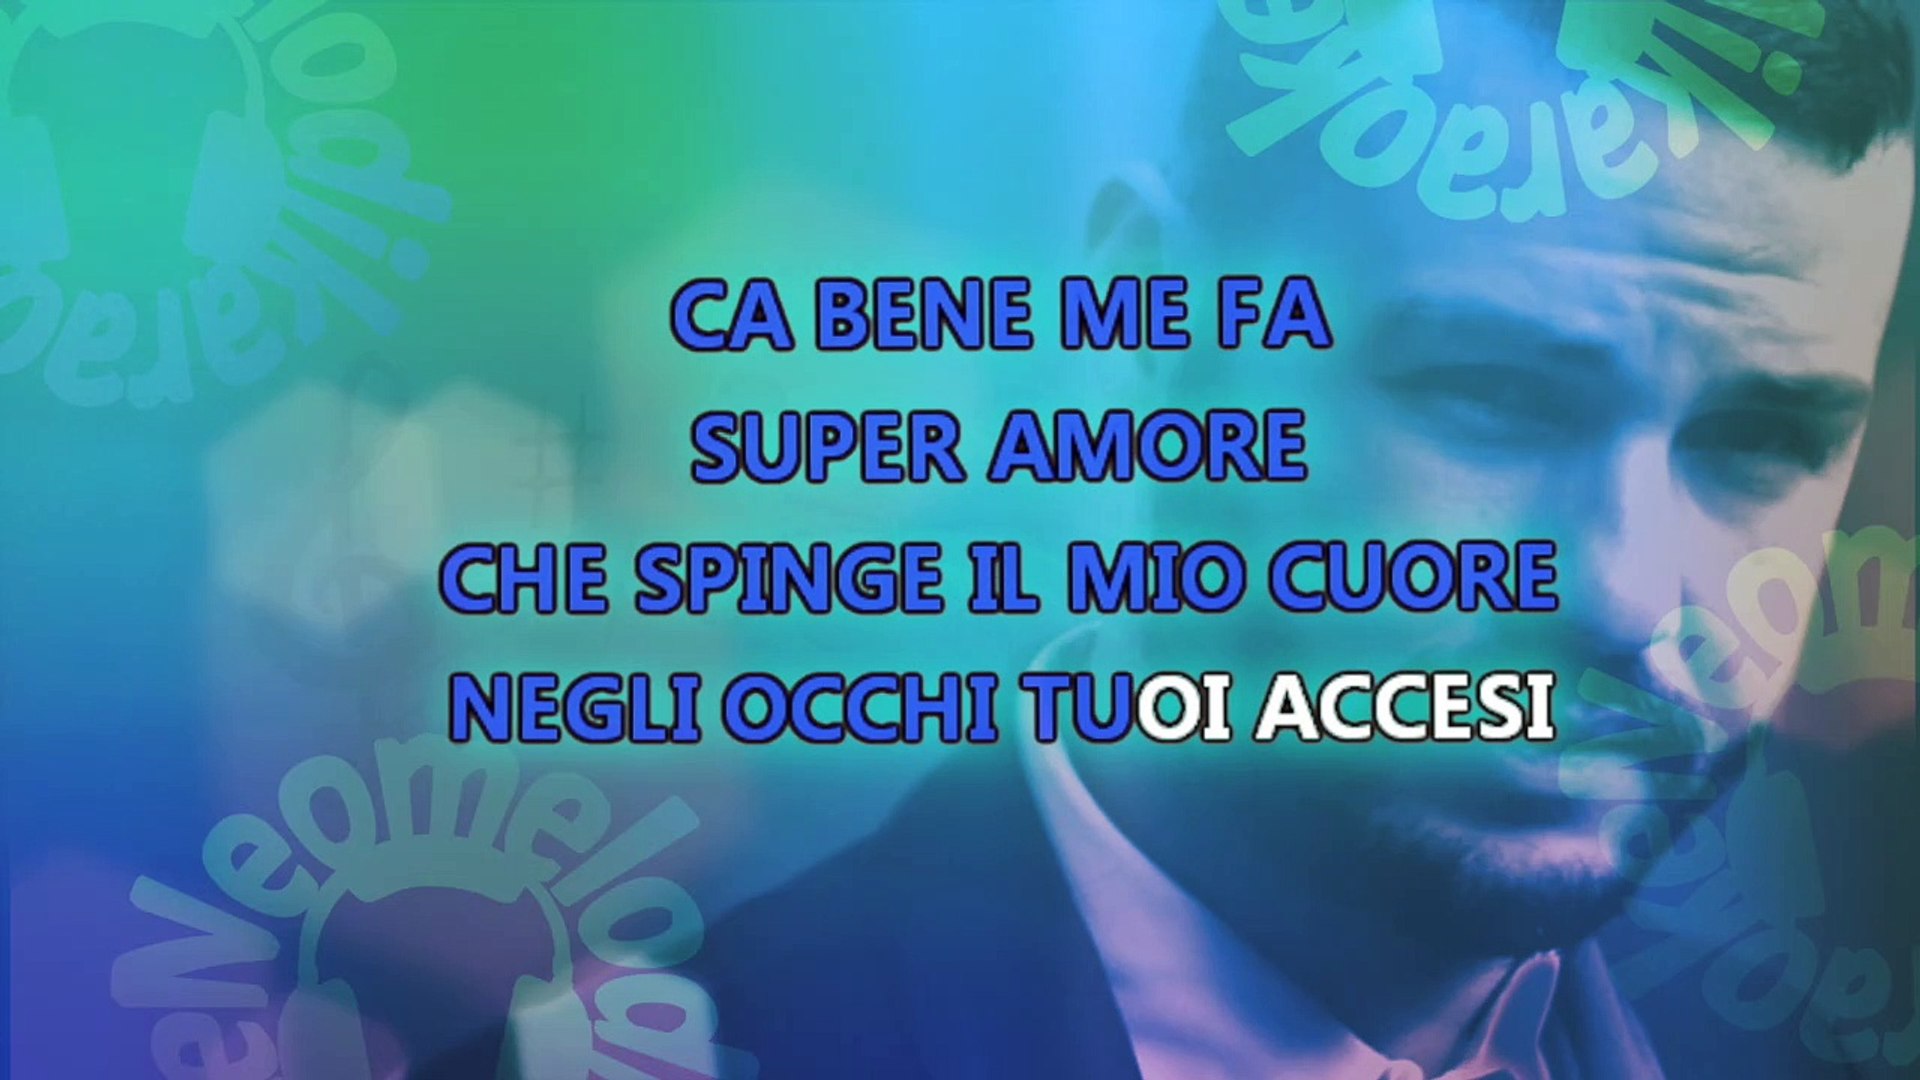 SUPER AMORE - MAX GIGLIOTTI - Video Dailymotion